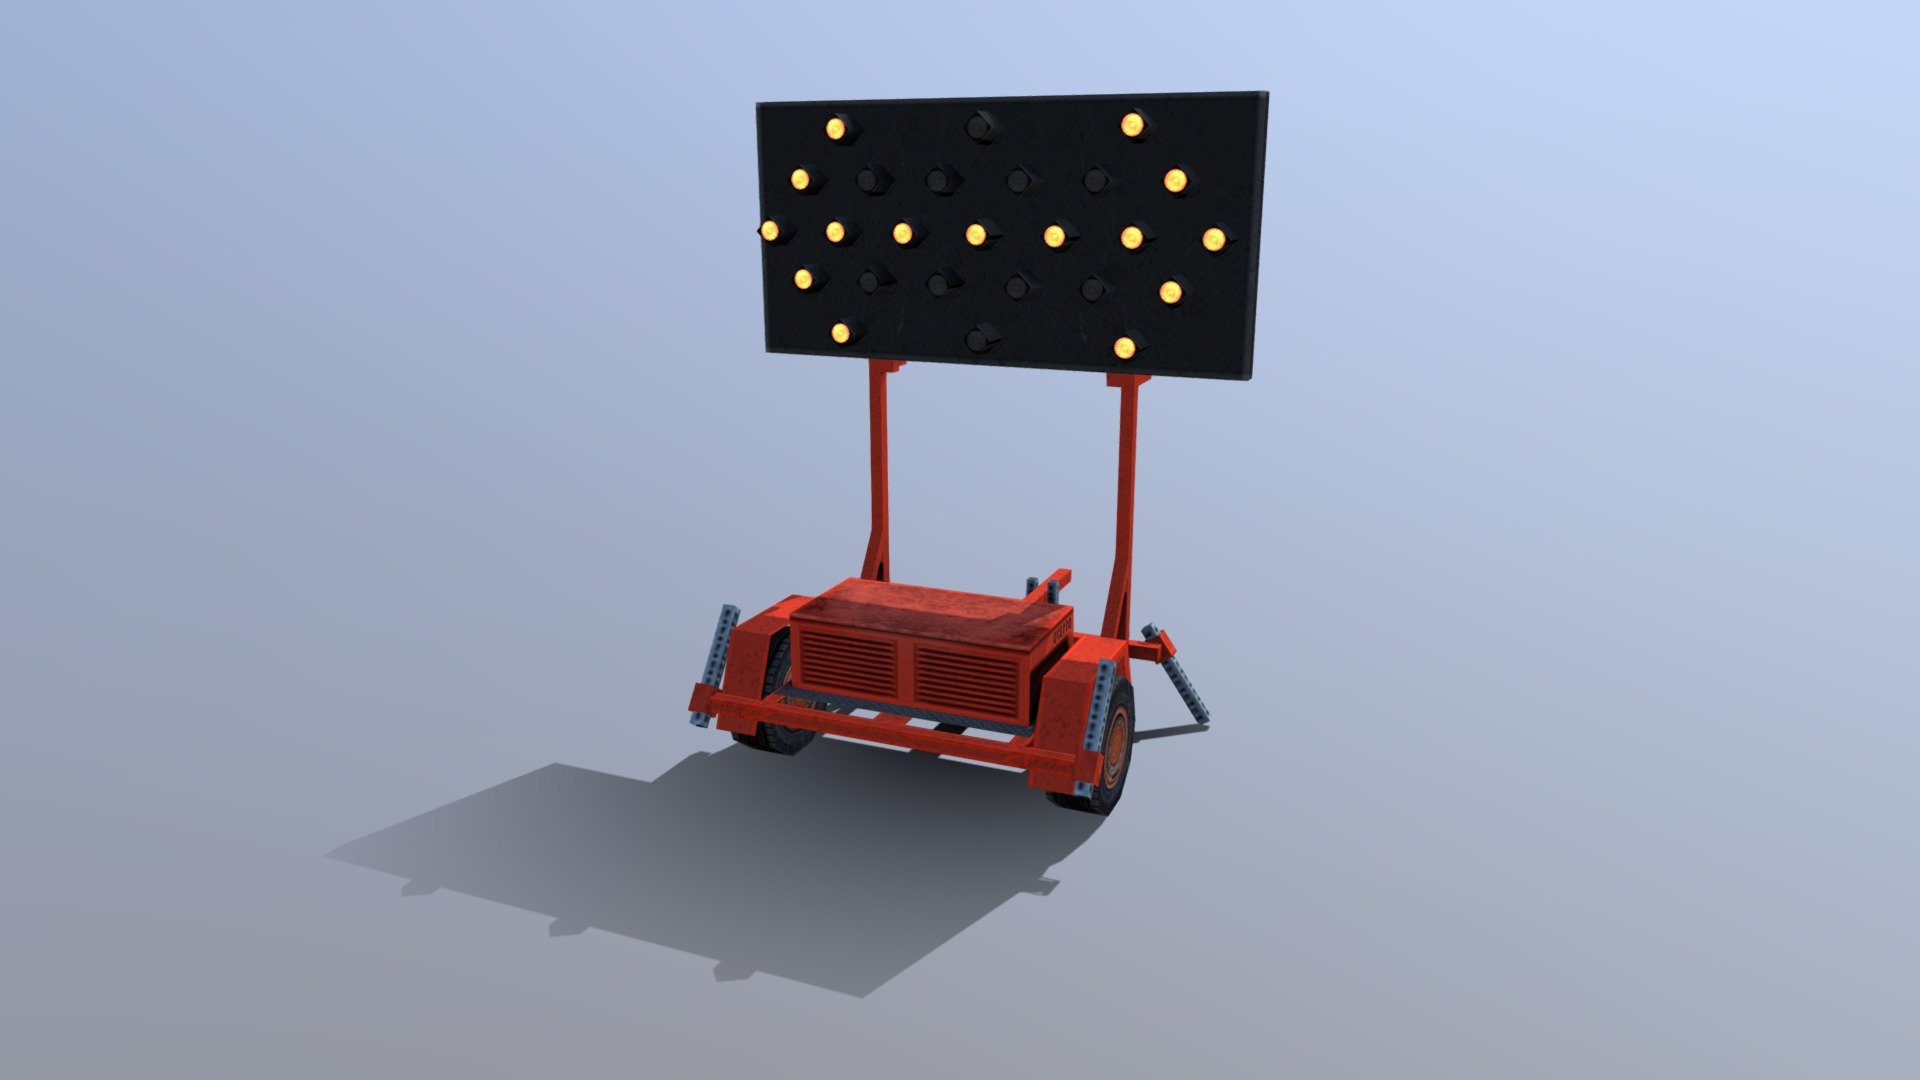 Cities skylines asset. Arrow board trailer, like those  seen in use for road works in North America. 

http://steamcommunity.com/sharedfiles/filedetails/?id=882701196 - Arrow Board Trailer - 3D model by CommonSpence 3d model